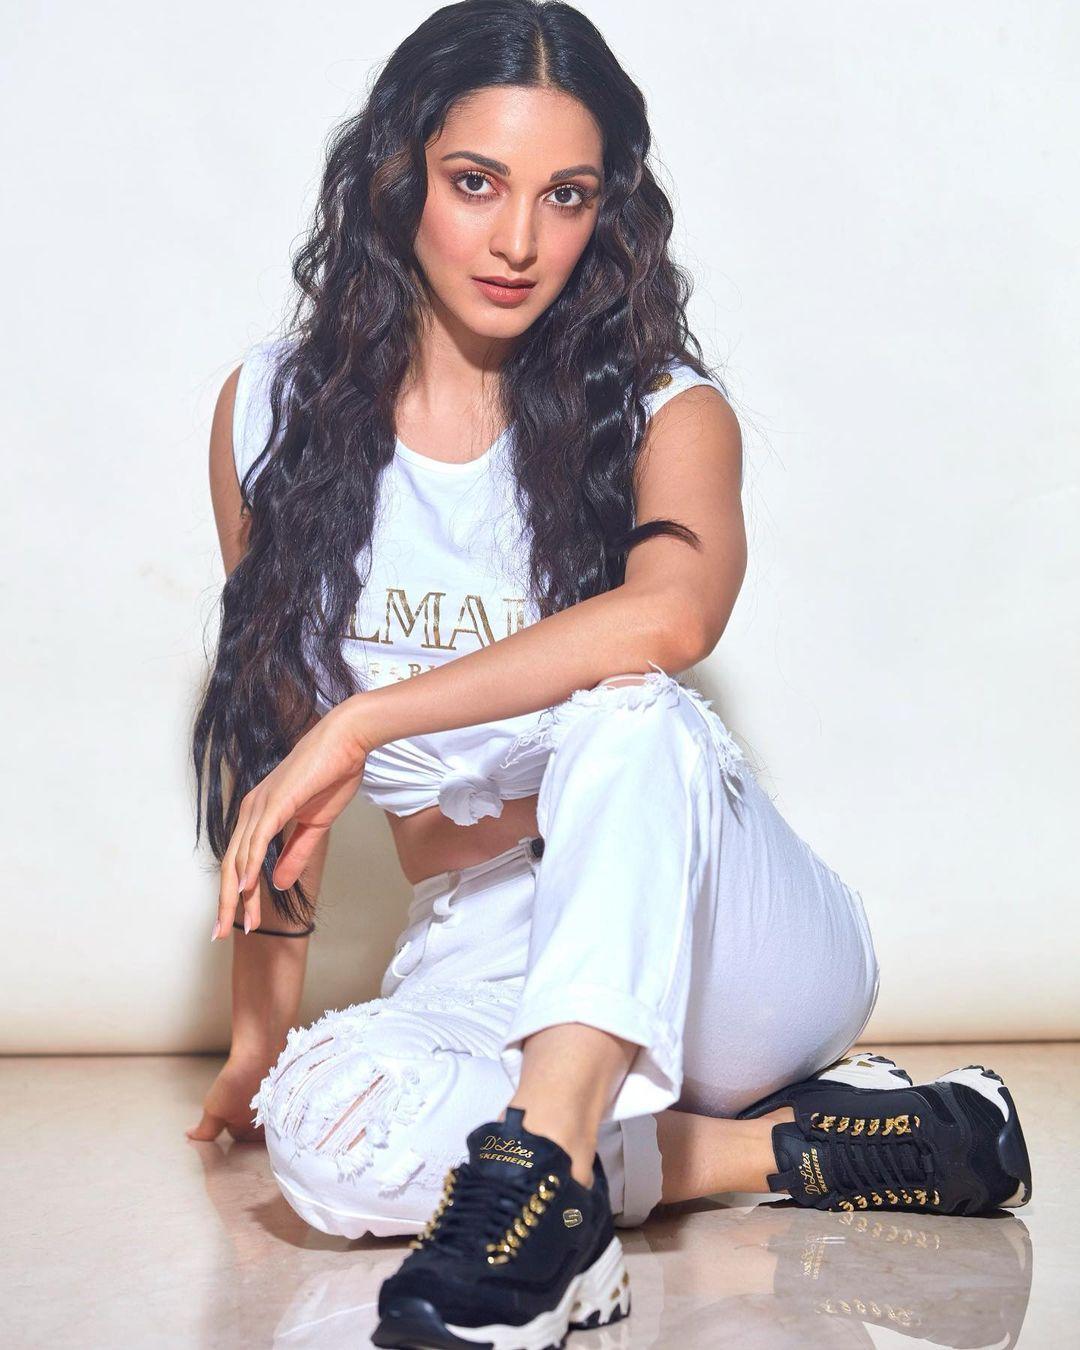 If today's going to be a long day for you and you want something comfortable and sporty, then go with Kiara Advani's look. Wear comfortable jeans and pair them with a crop top and sports shoes. The actress added a touch of fun by adding curls to her hair